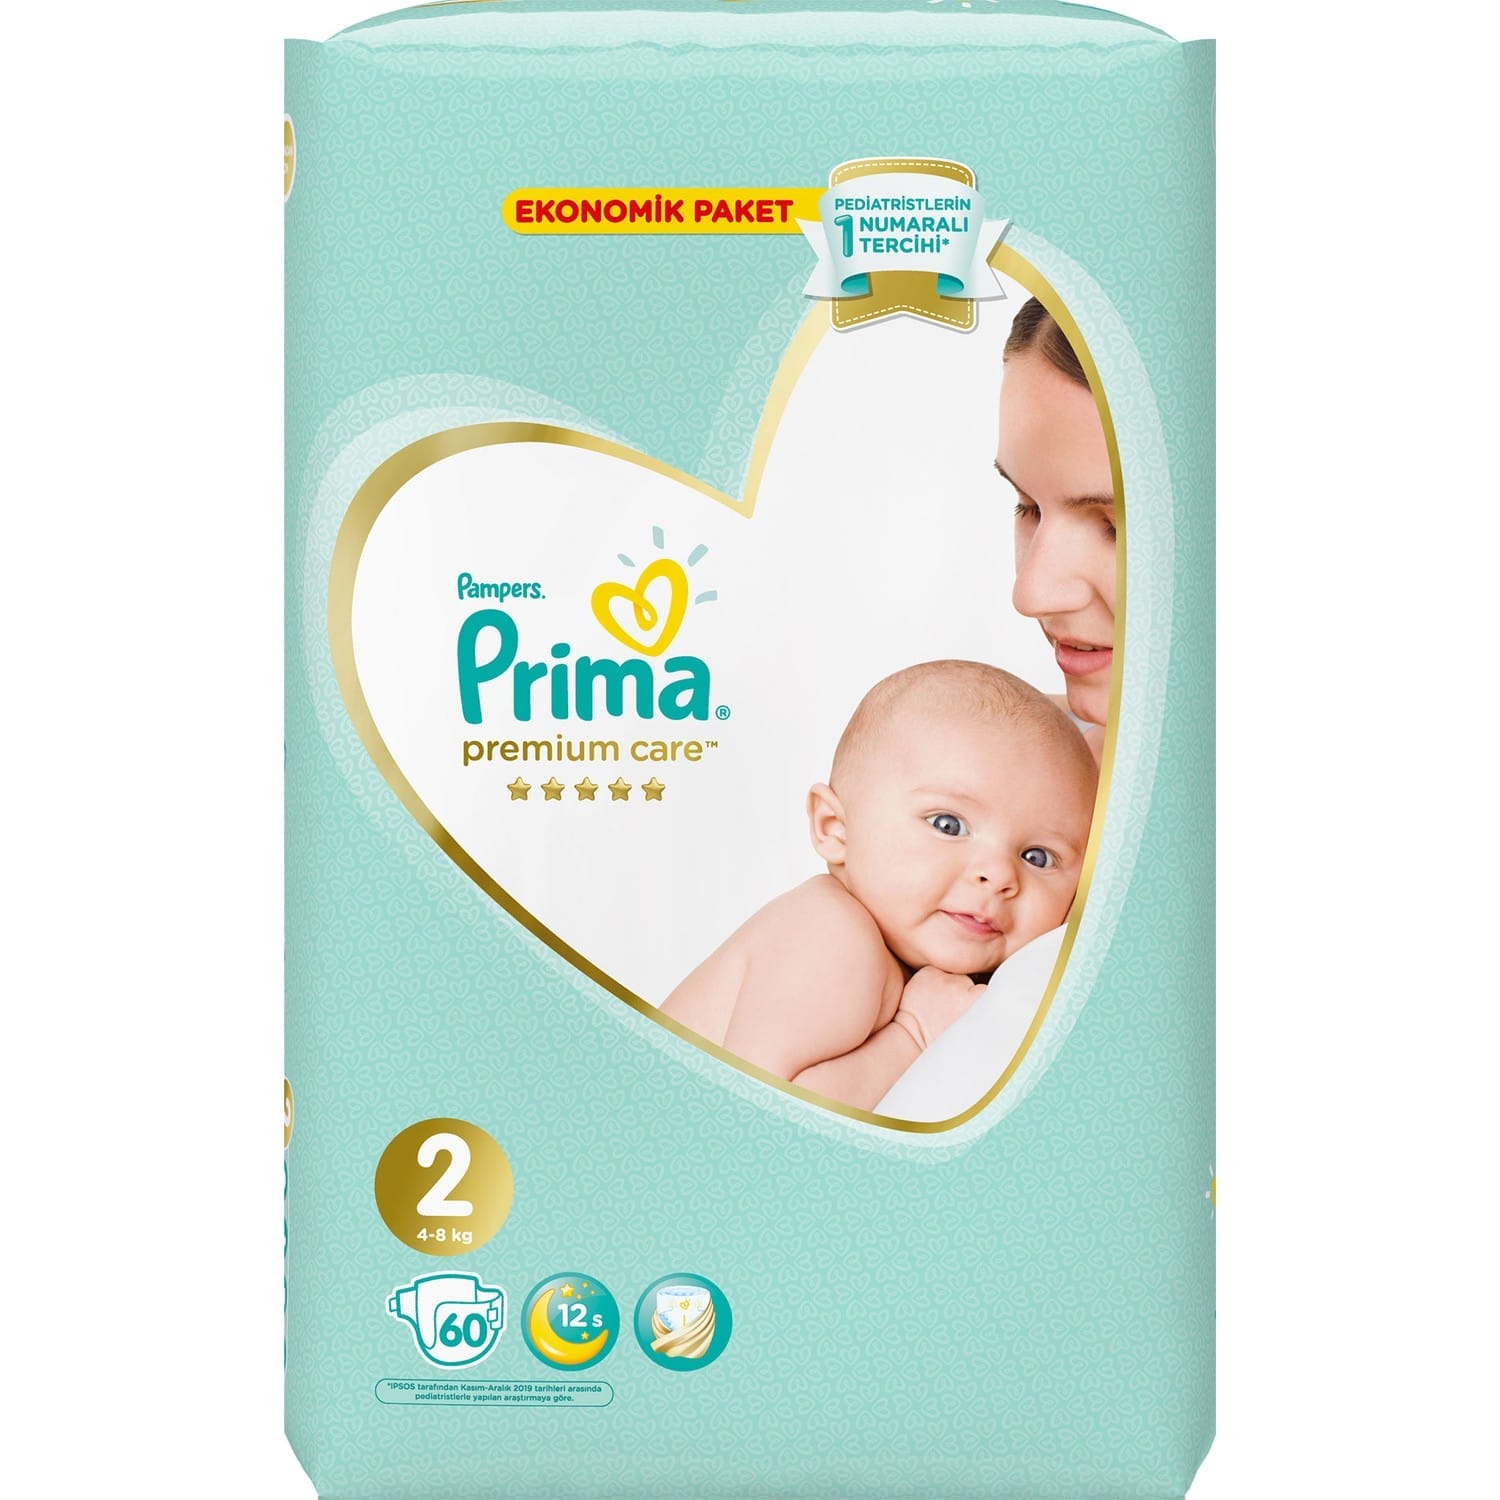 Pampers Prima No2 60 pc 